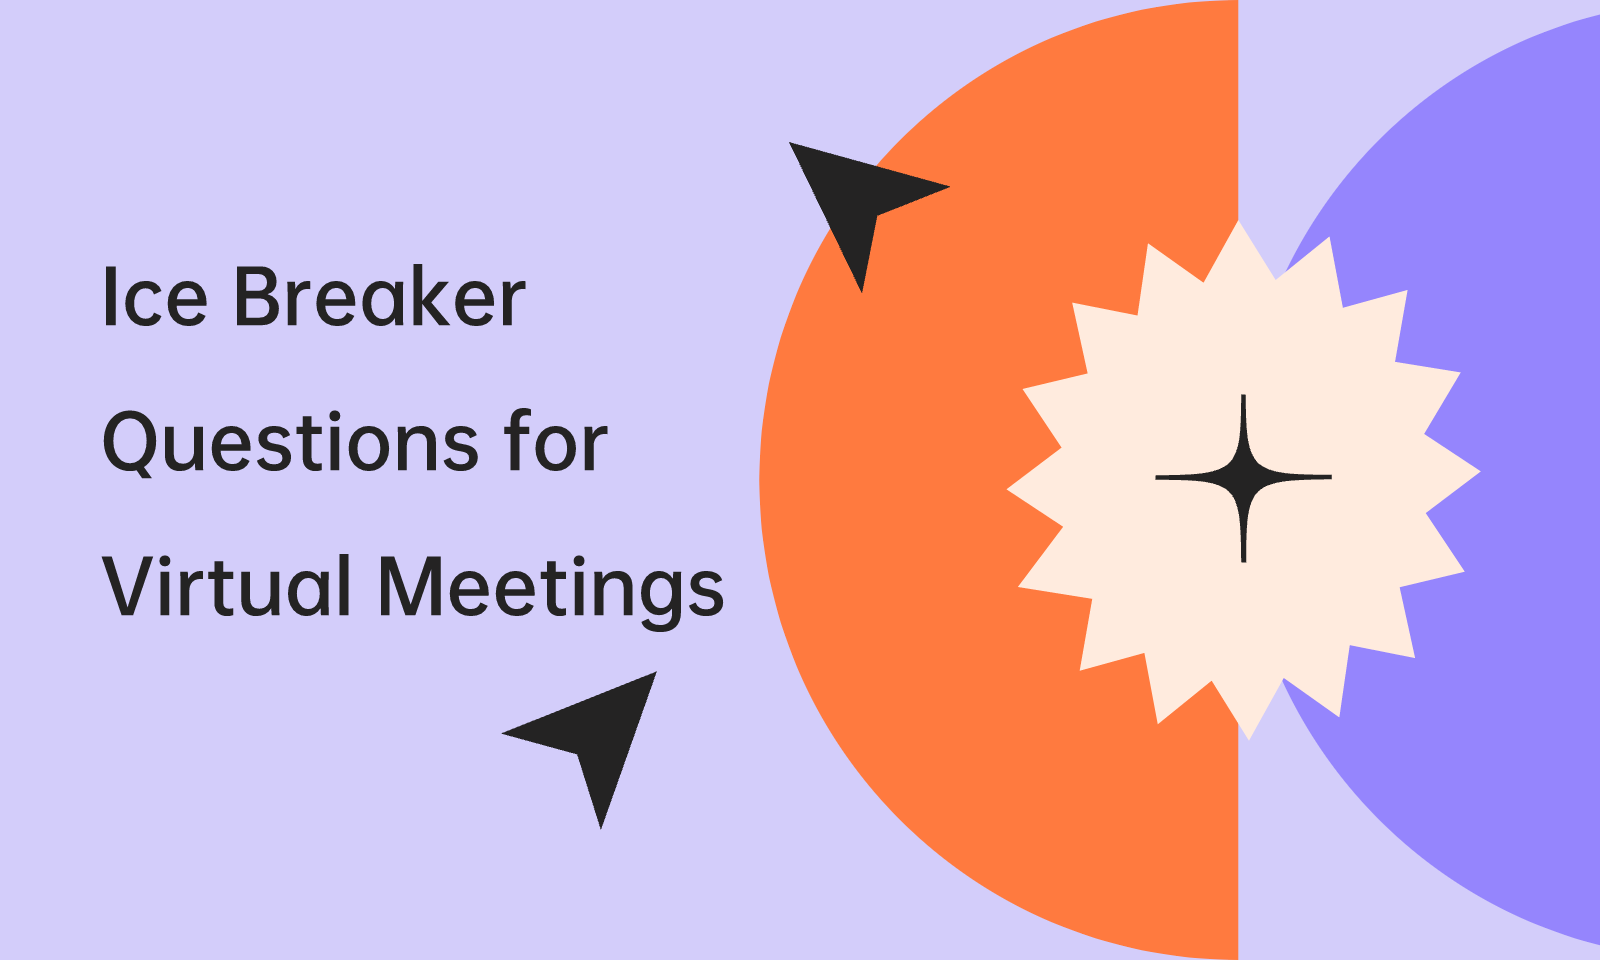 Ice Breaker Questions for Virtual Meetings